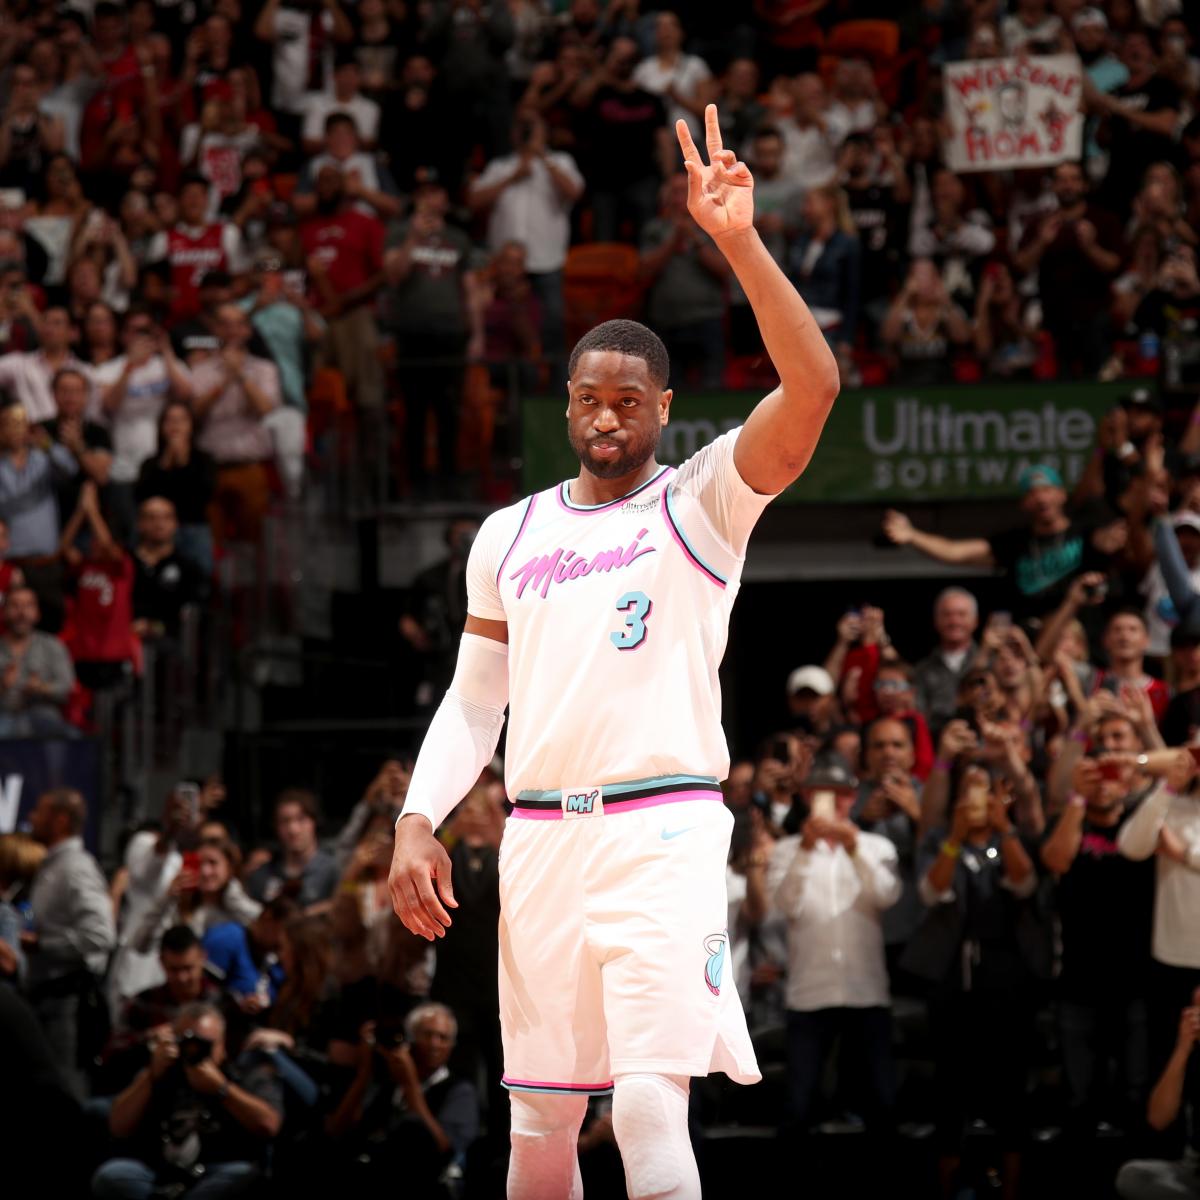 Dwyane Wade Announces Return to Miami Heat with '1 Last Dance